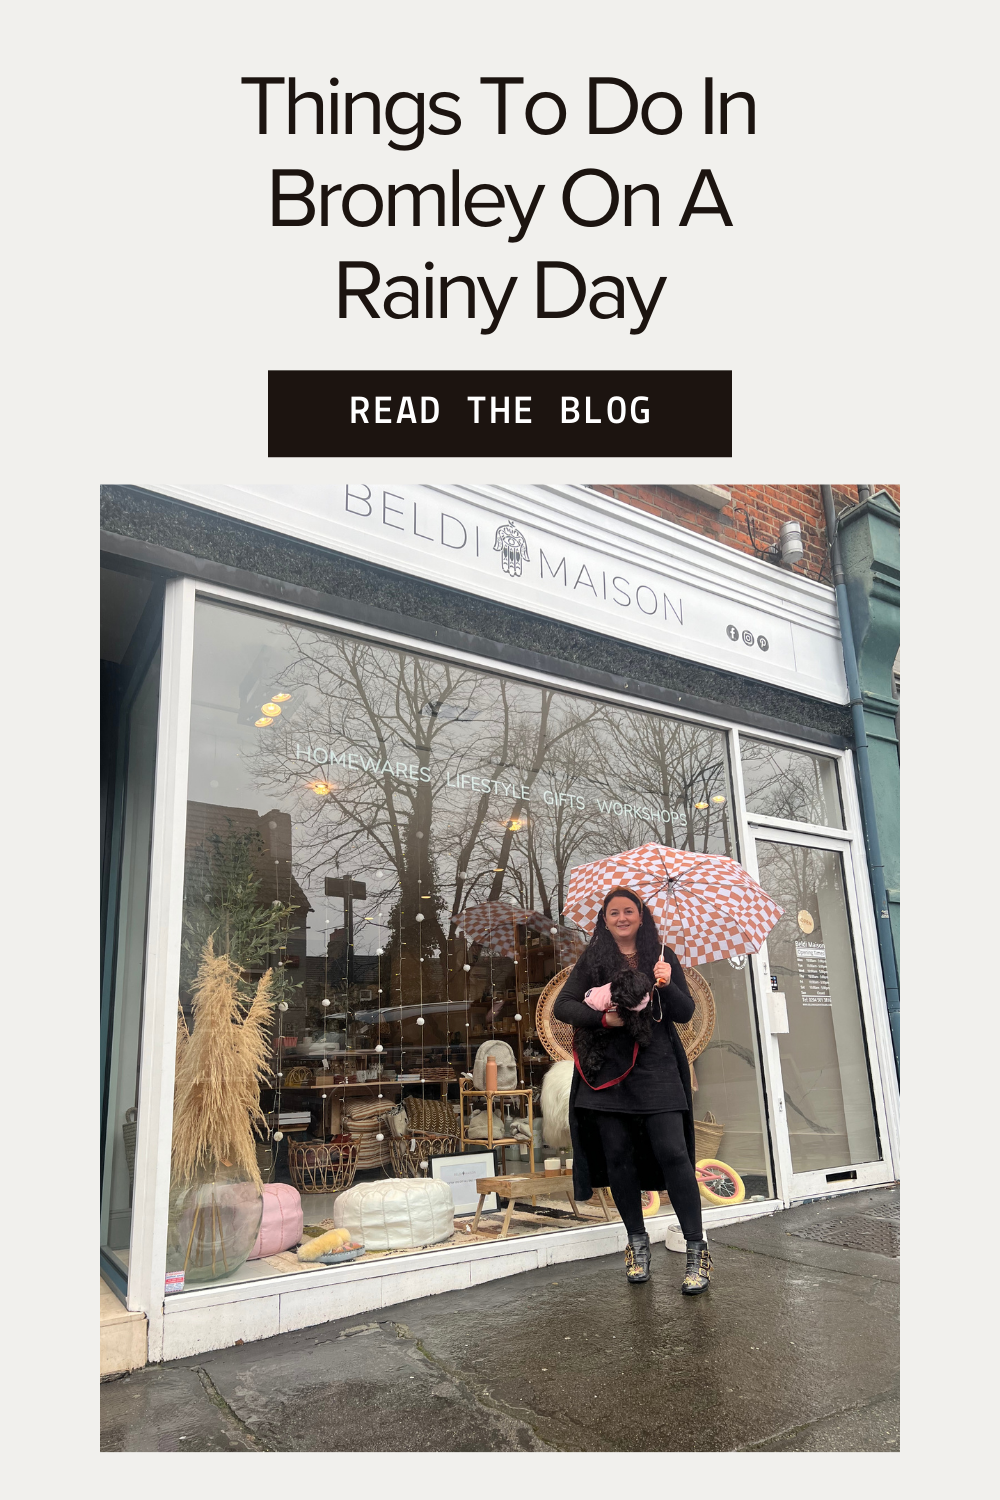 Things To Do In Bromley On A Rainy Day.